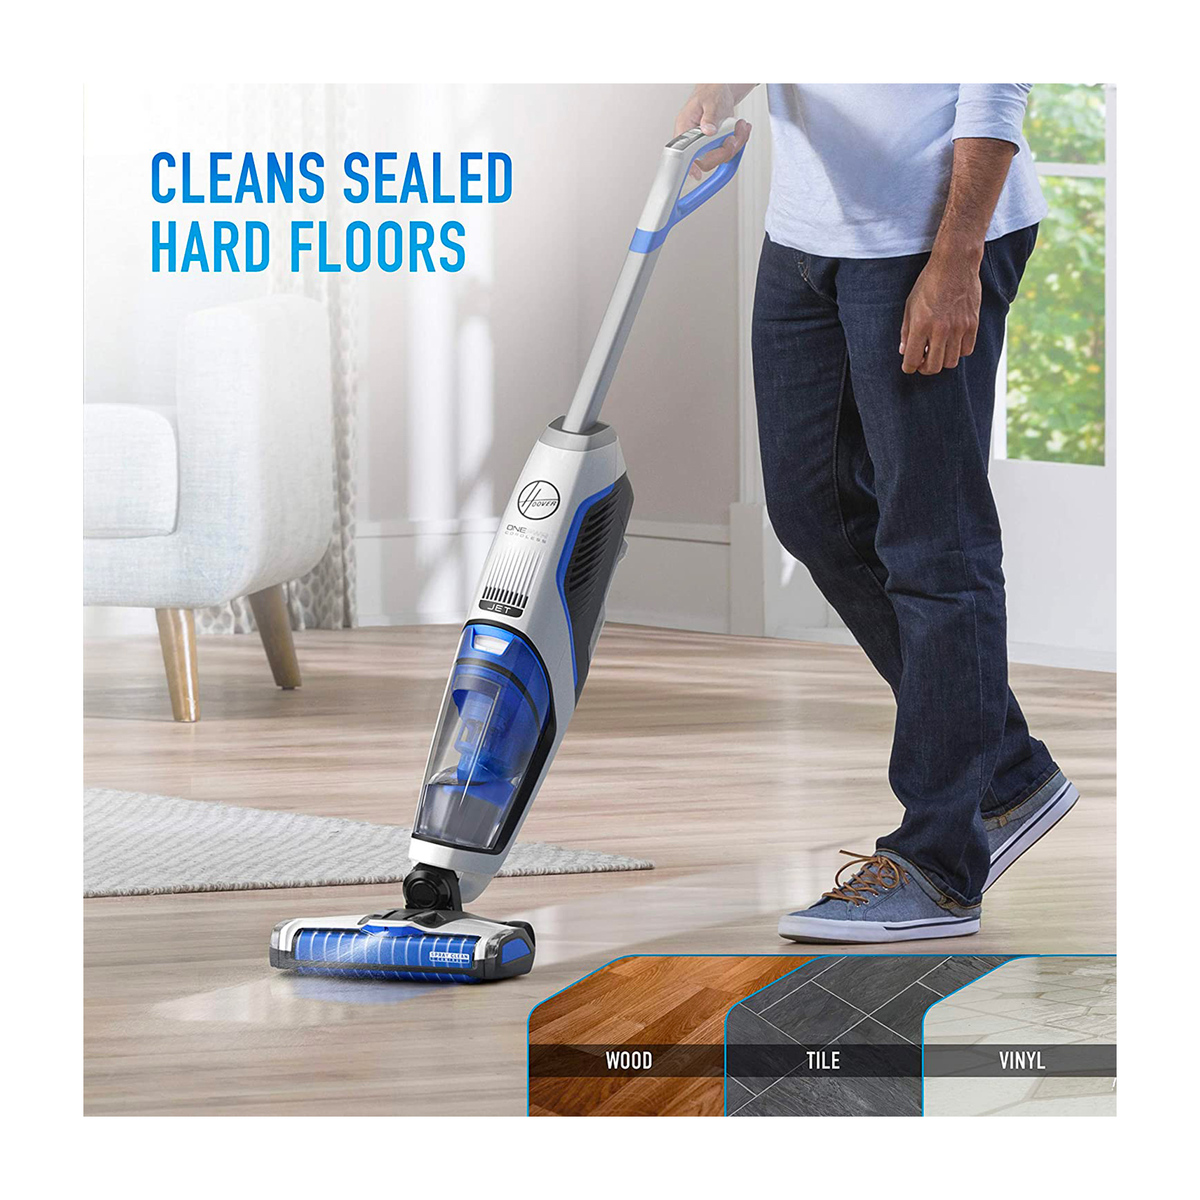 Hoover ONEPWR FloorMate Jet Cordless Hard Floor Cleaner CLHF-GLME 220W